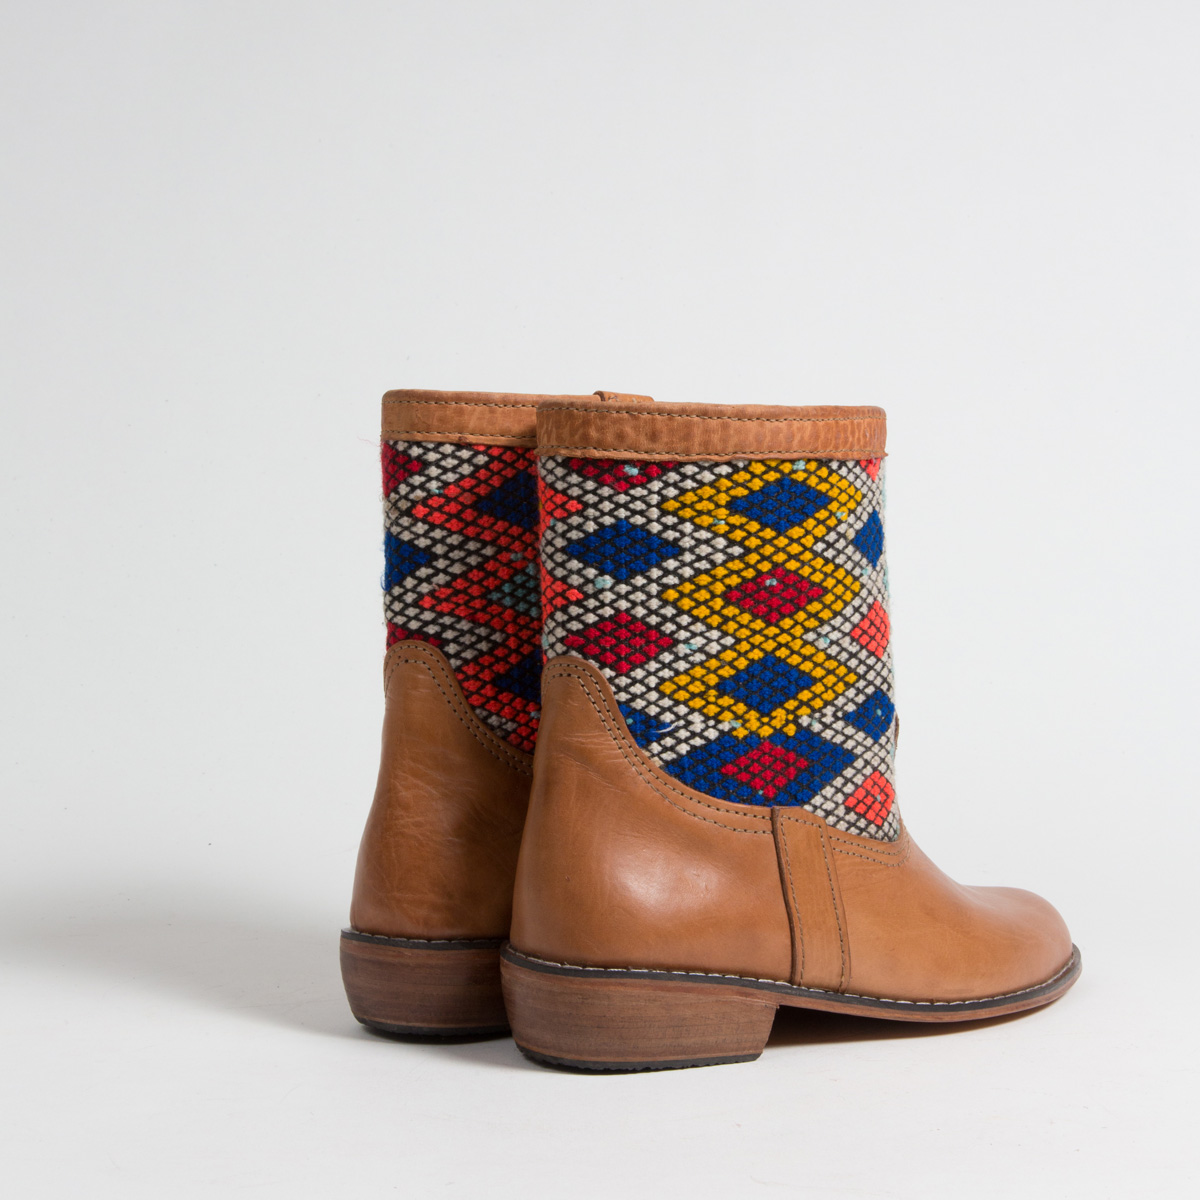 Bottines Kilim cuir mababouche artisanales (Réf. MOI-38)